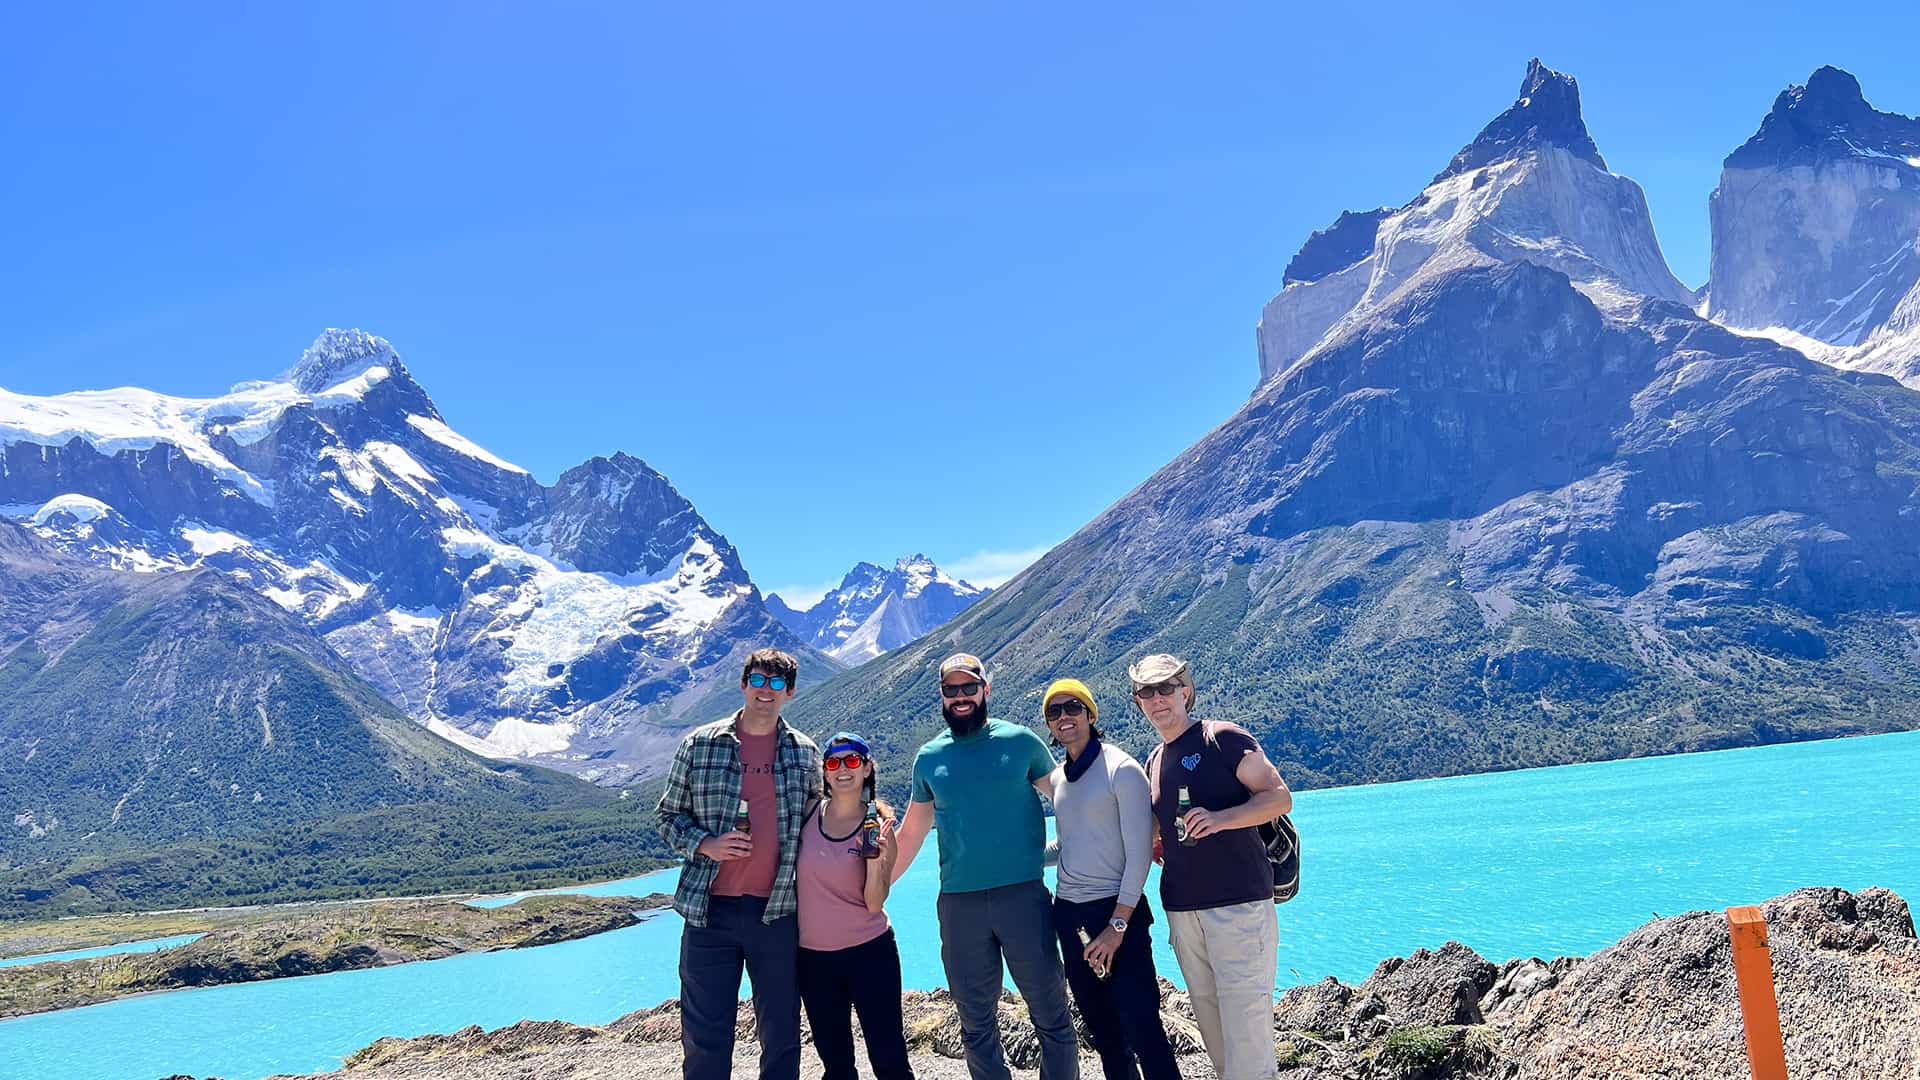 Author with friends at the base of Torres del Paine at the end of hike